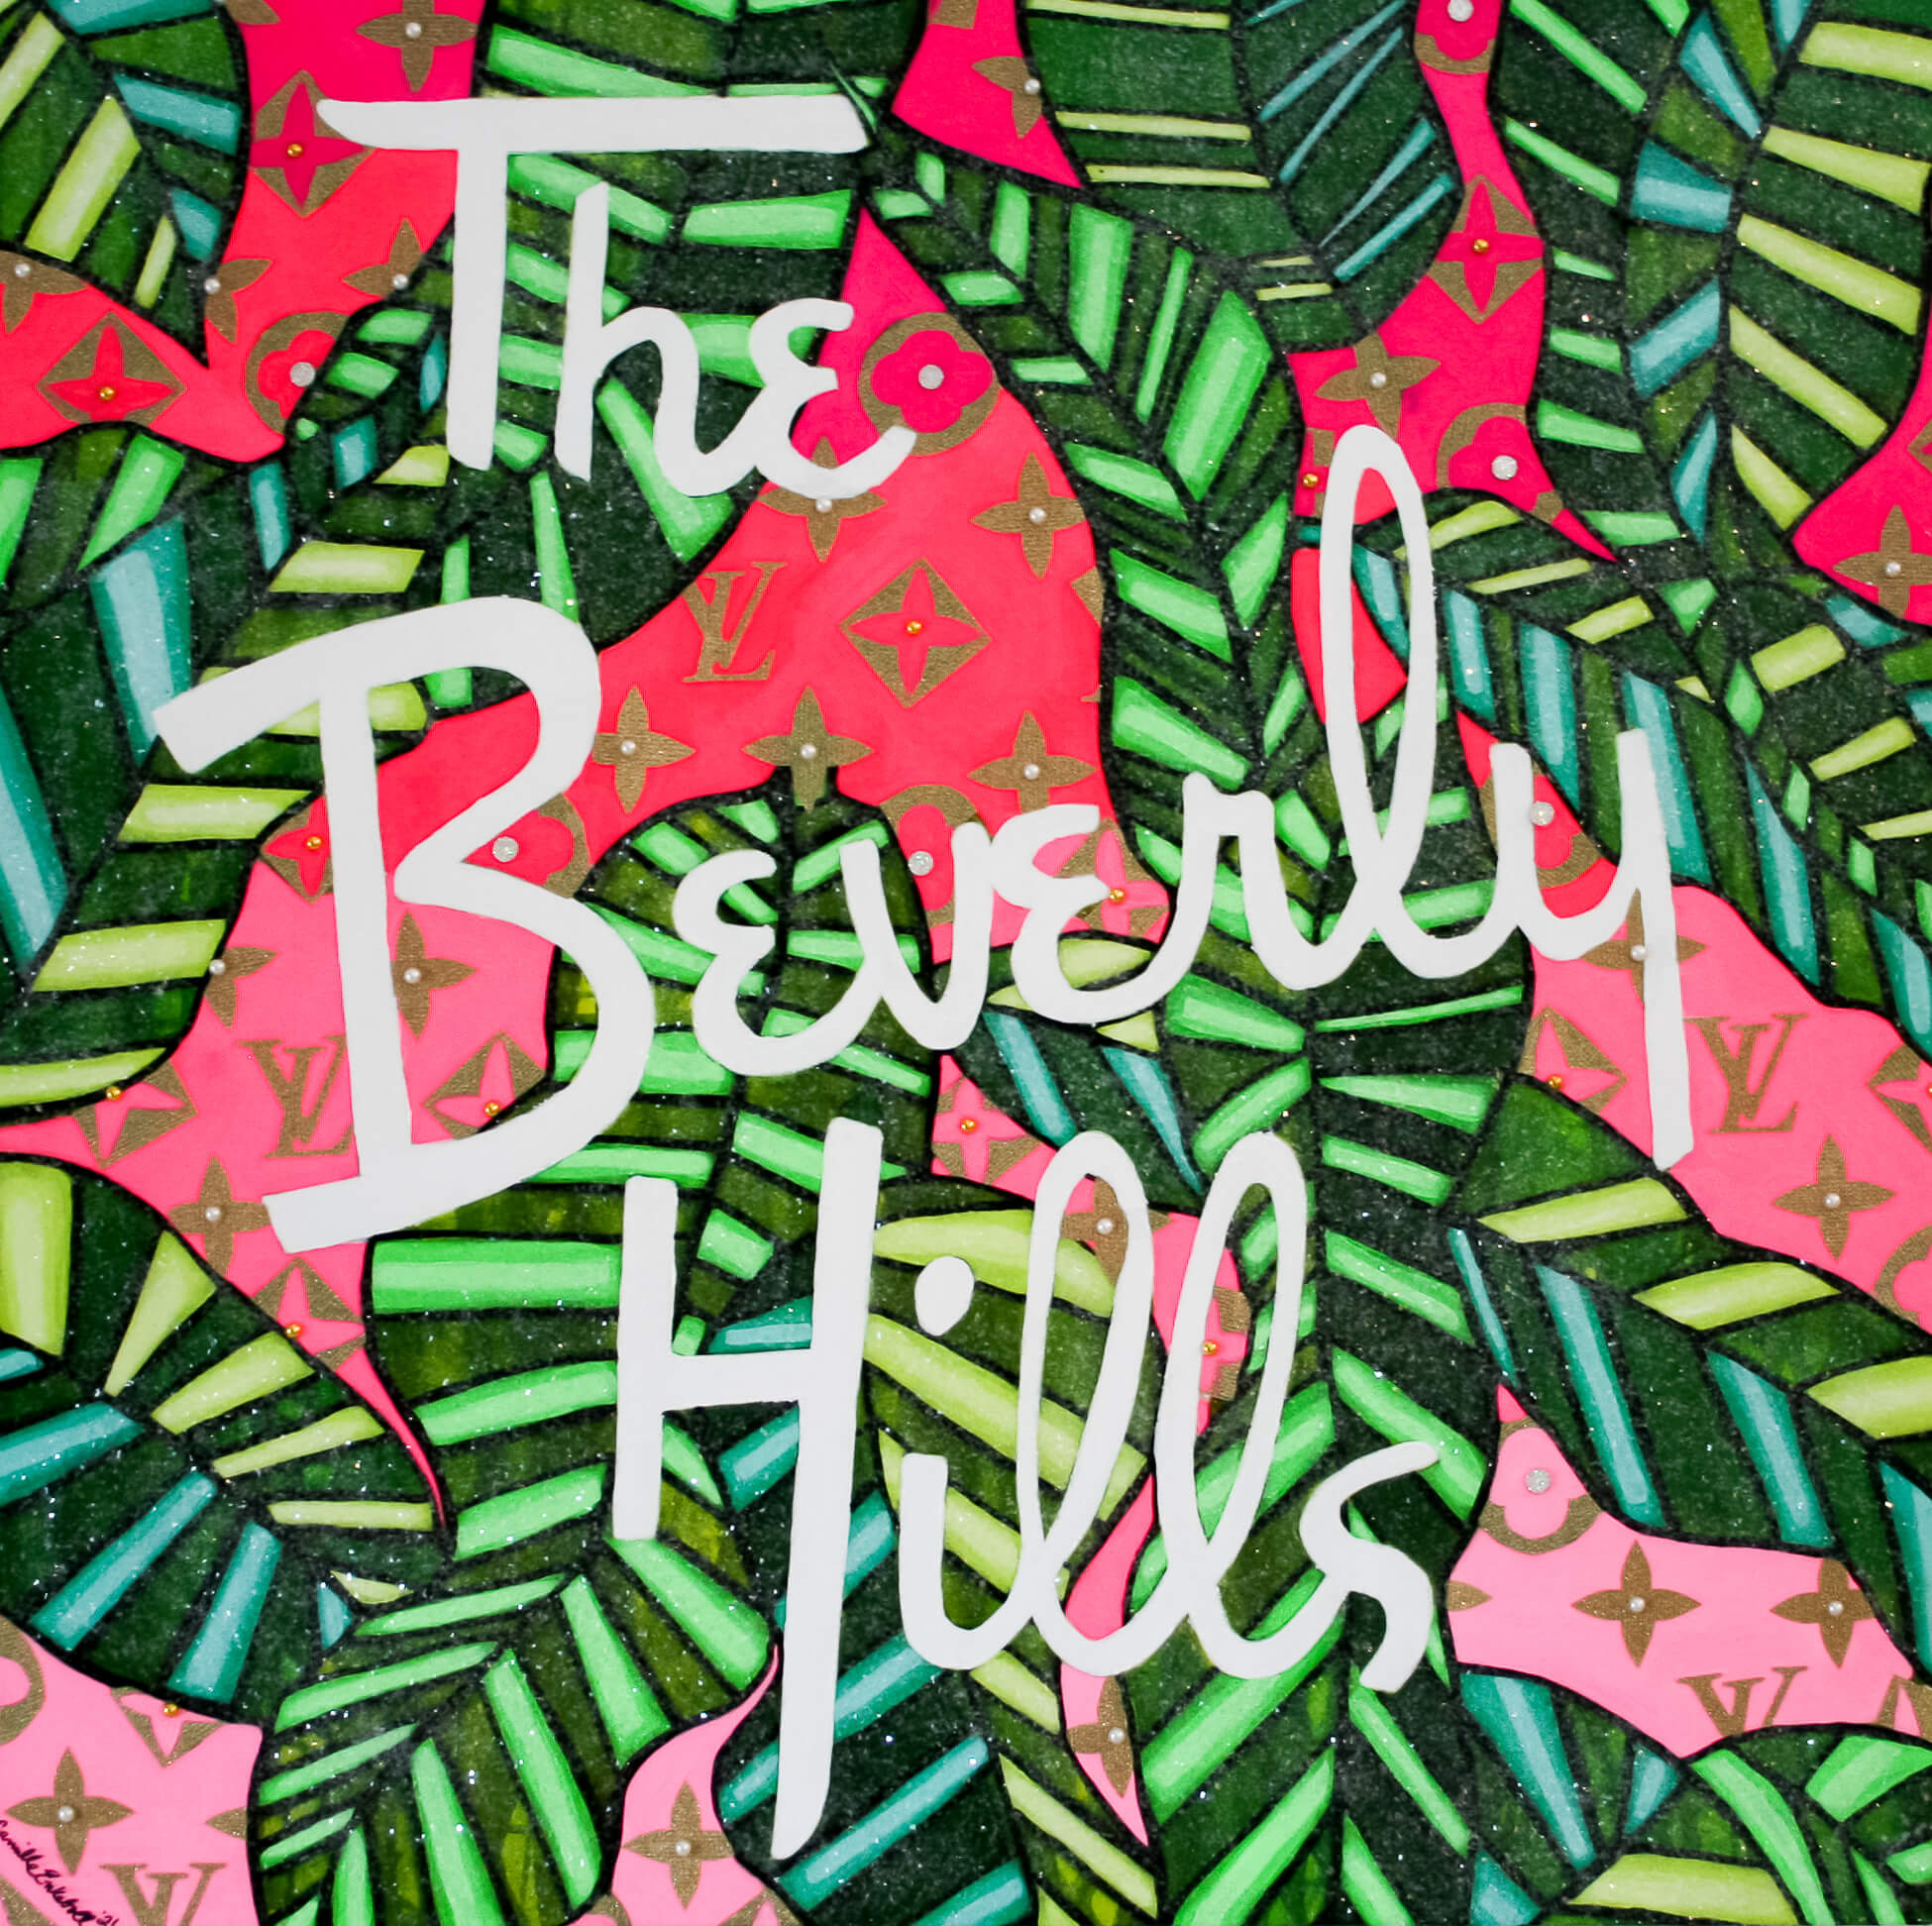 THE BEVERLY HILLS 3.0